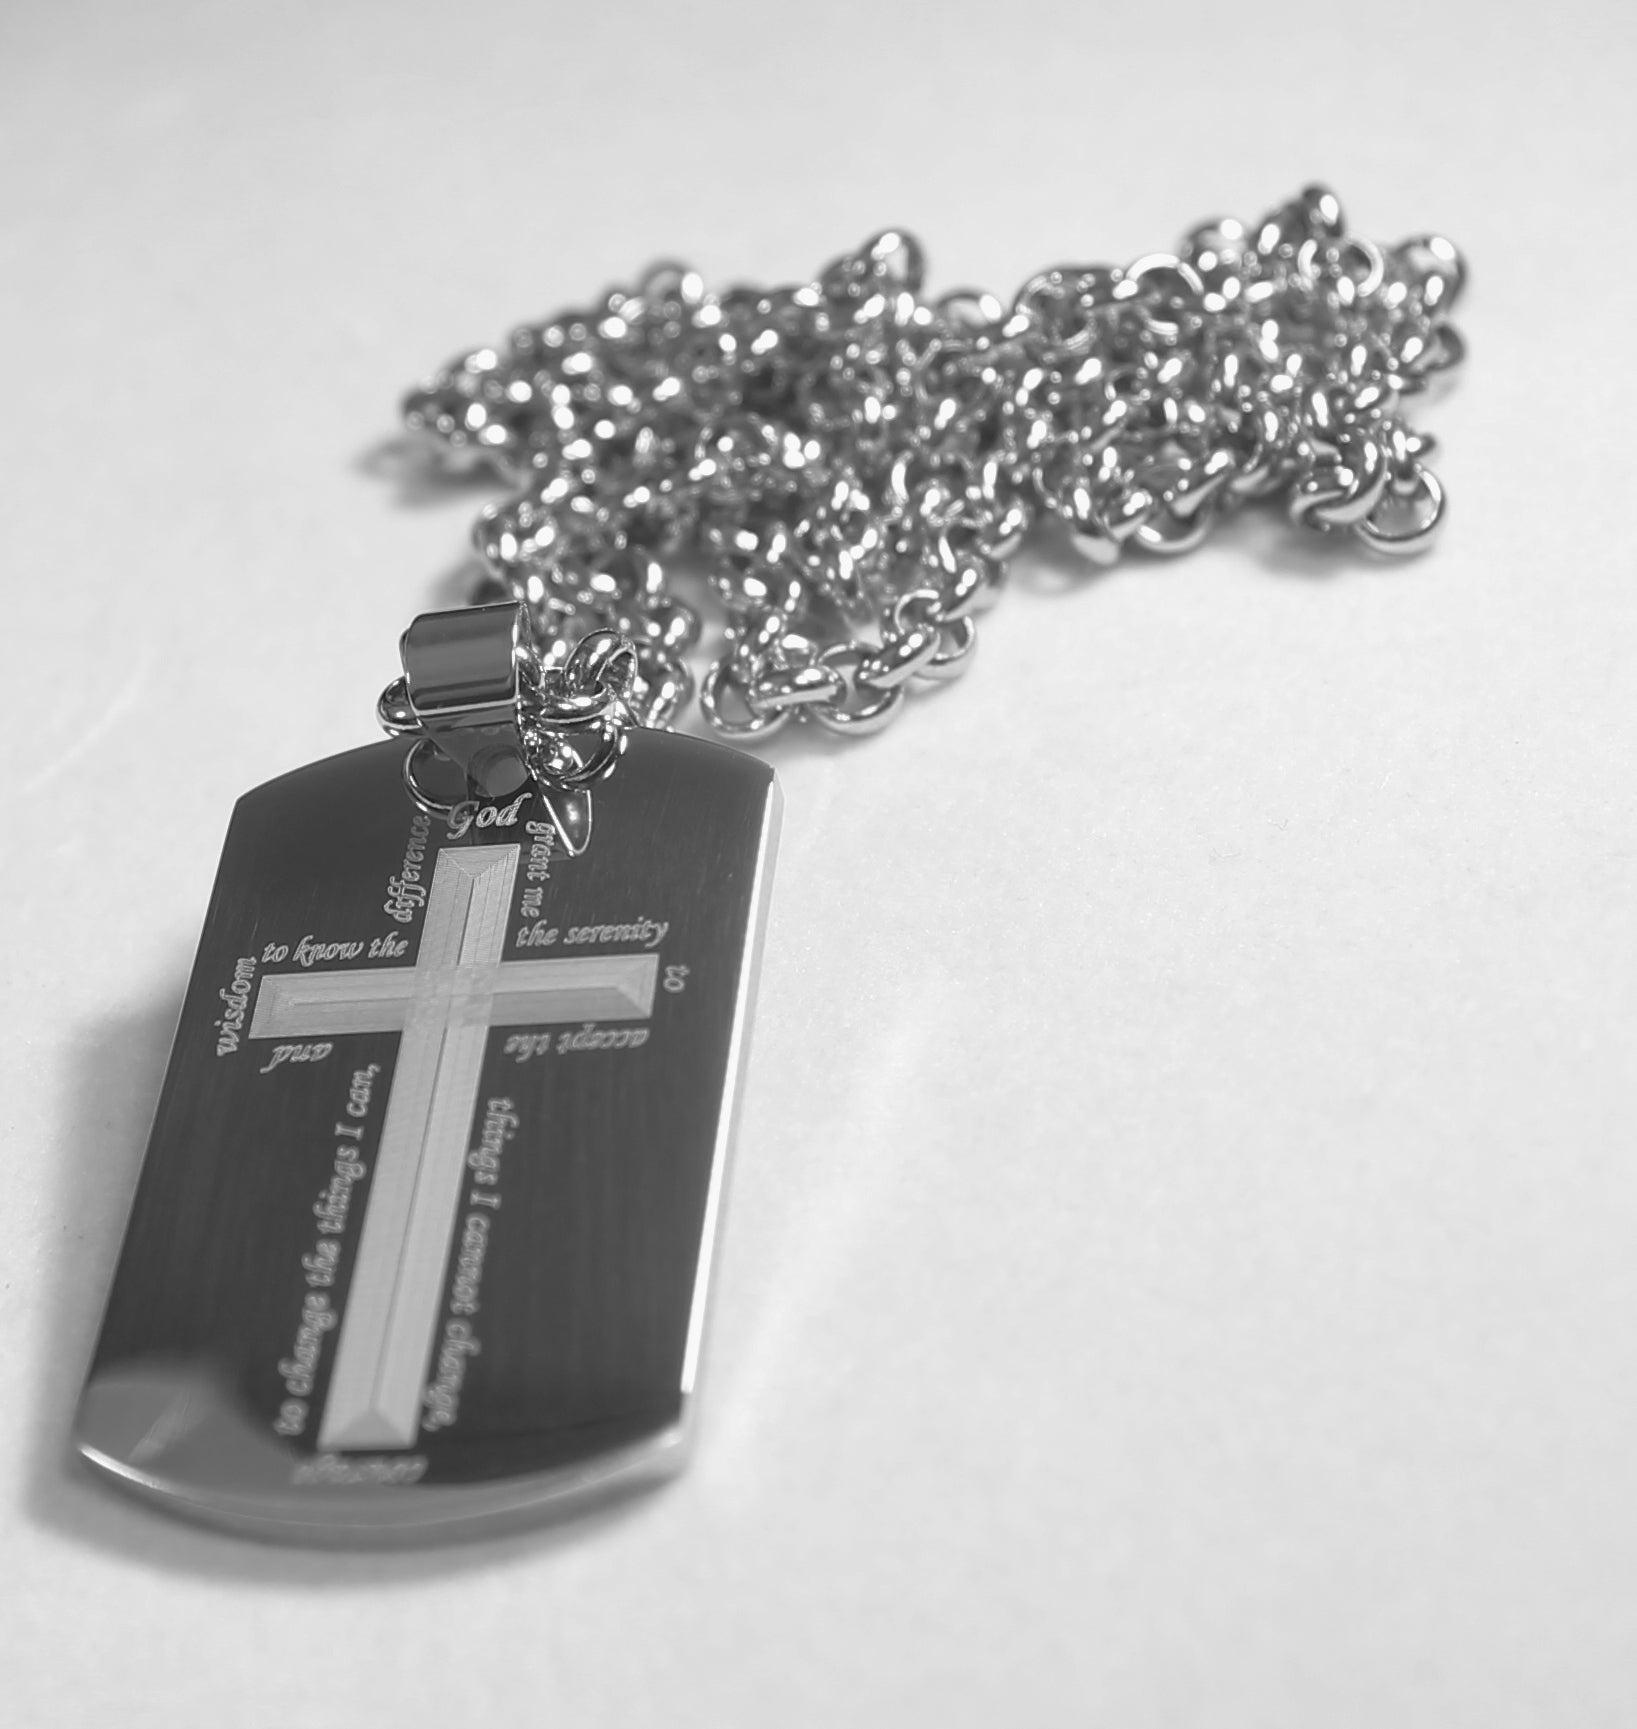 SERENITY PRAYER AROUND CROSS SOLID THICK STAINLESS STEEL RELIGION NECKLACE - Samstagsandmore